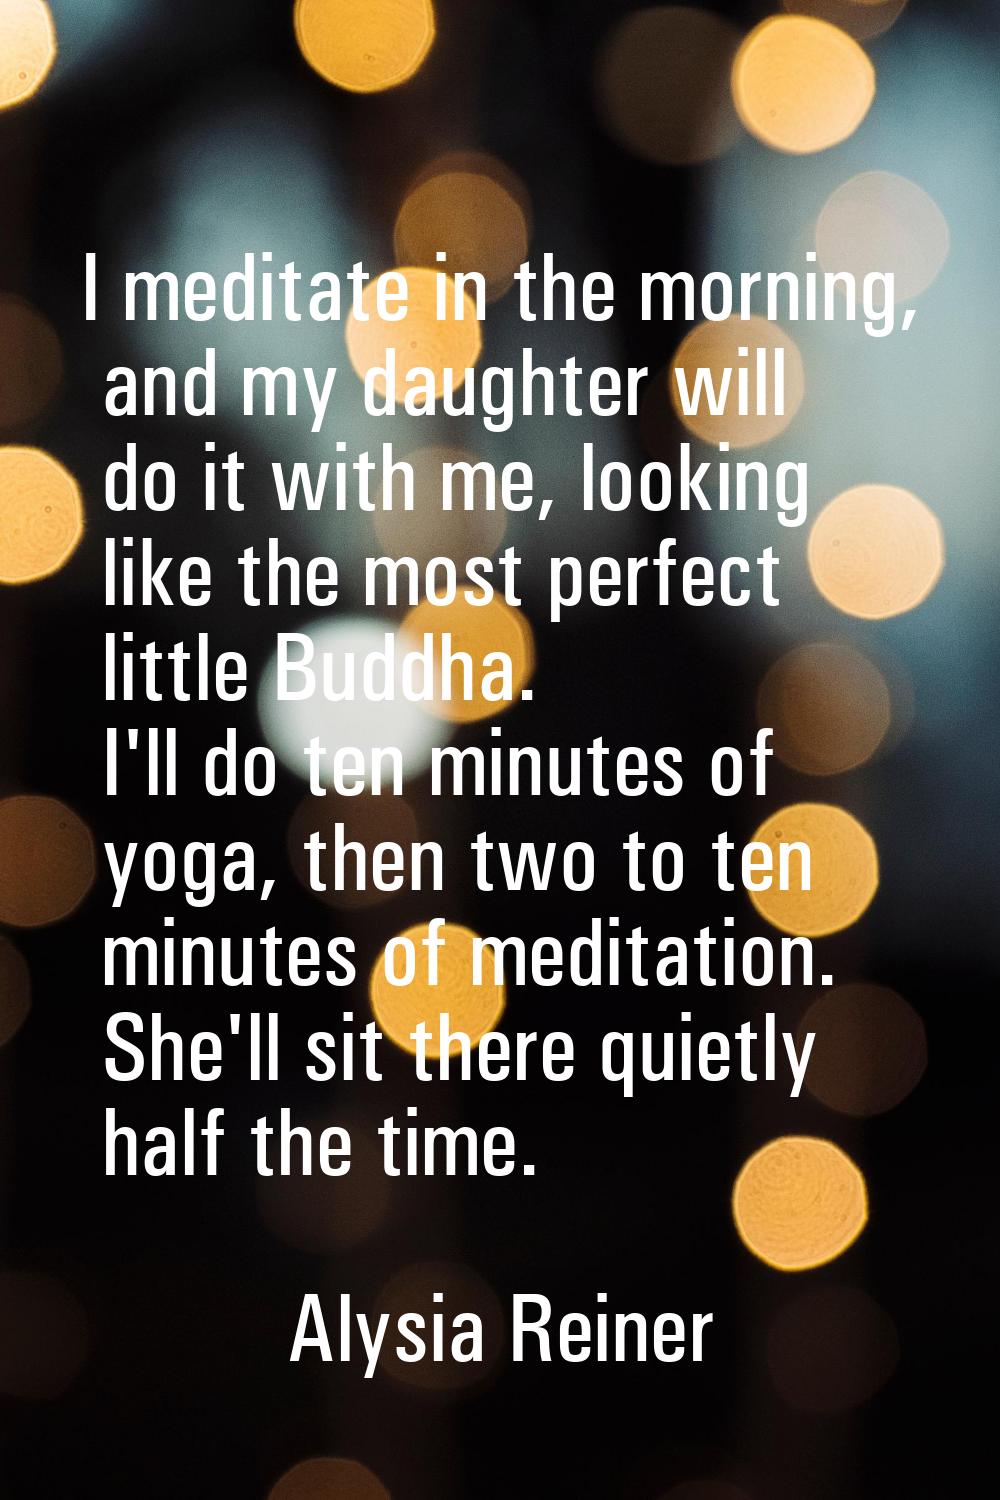 I meditate in the morning, and my daughter will do it with me, looking like the most perfect little